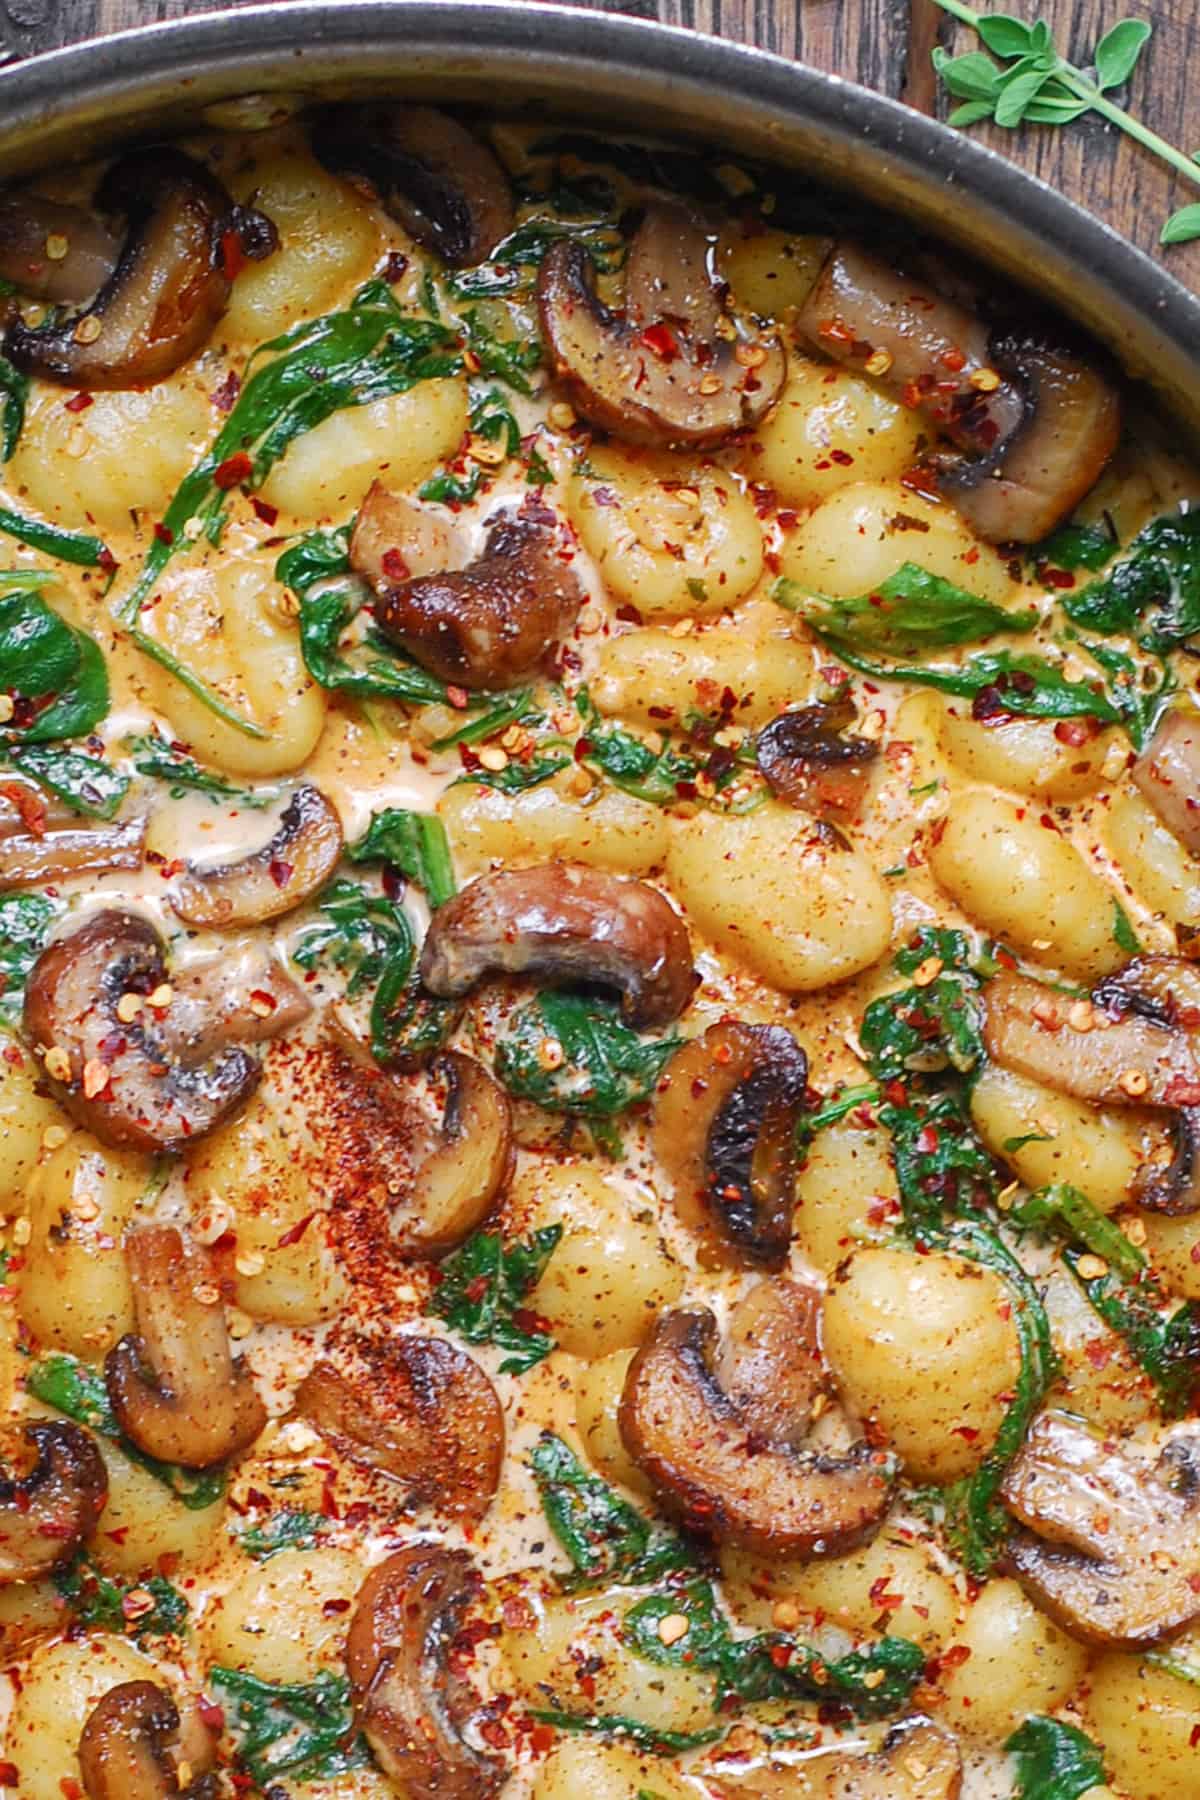 Creamy Spinach and Mushroom Gnocchi in a stainless steel pan.